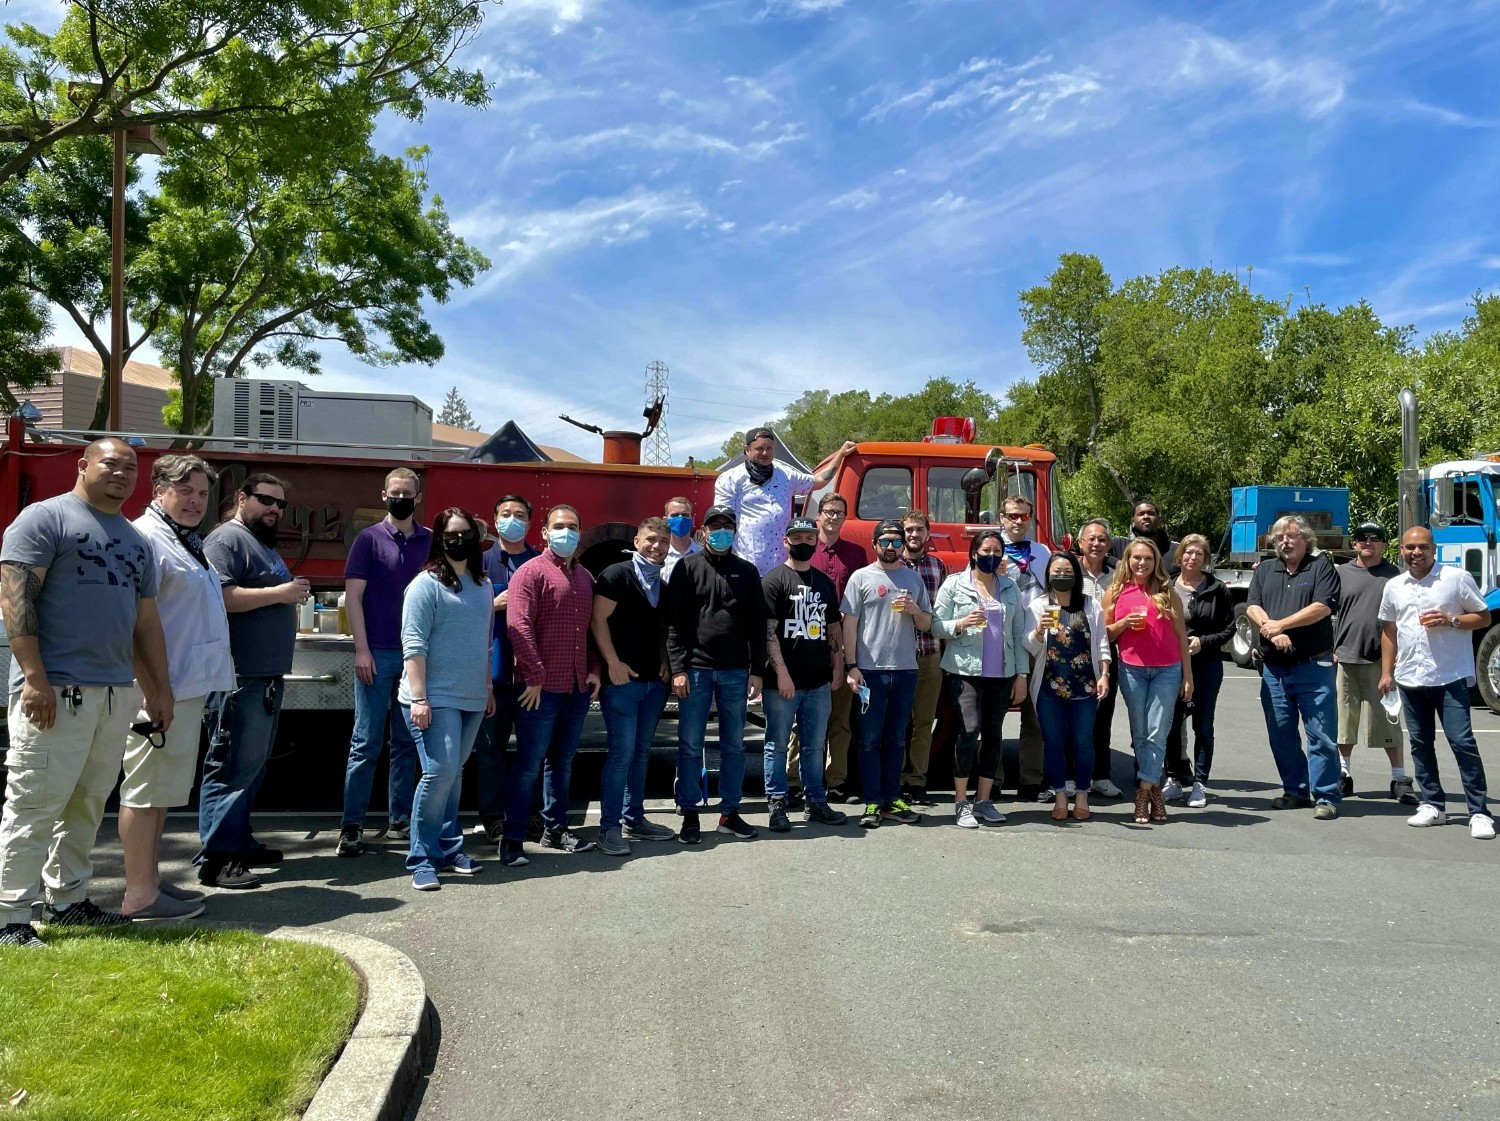 Our company celebrating a tool shipment with the Forge Pizza Fire Truck! 